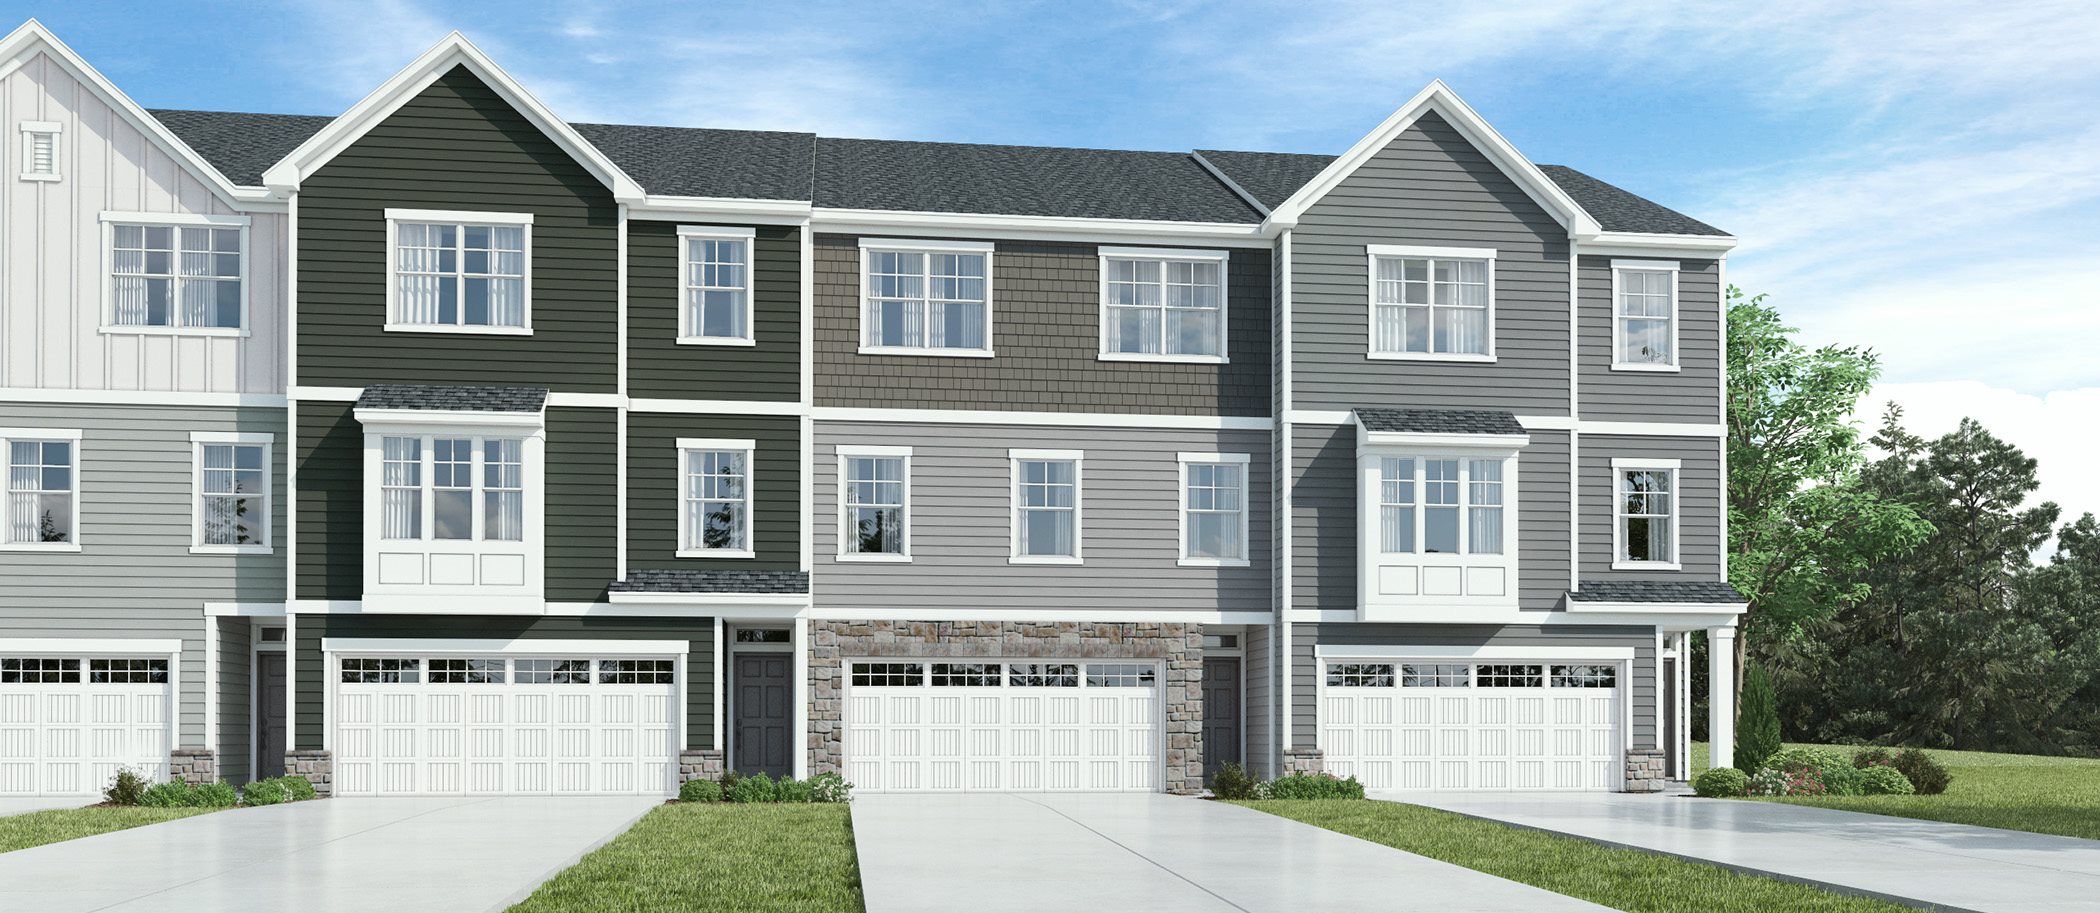 Corners at Brier Creek - New Homes for sale in Raleigh